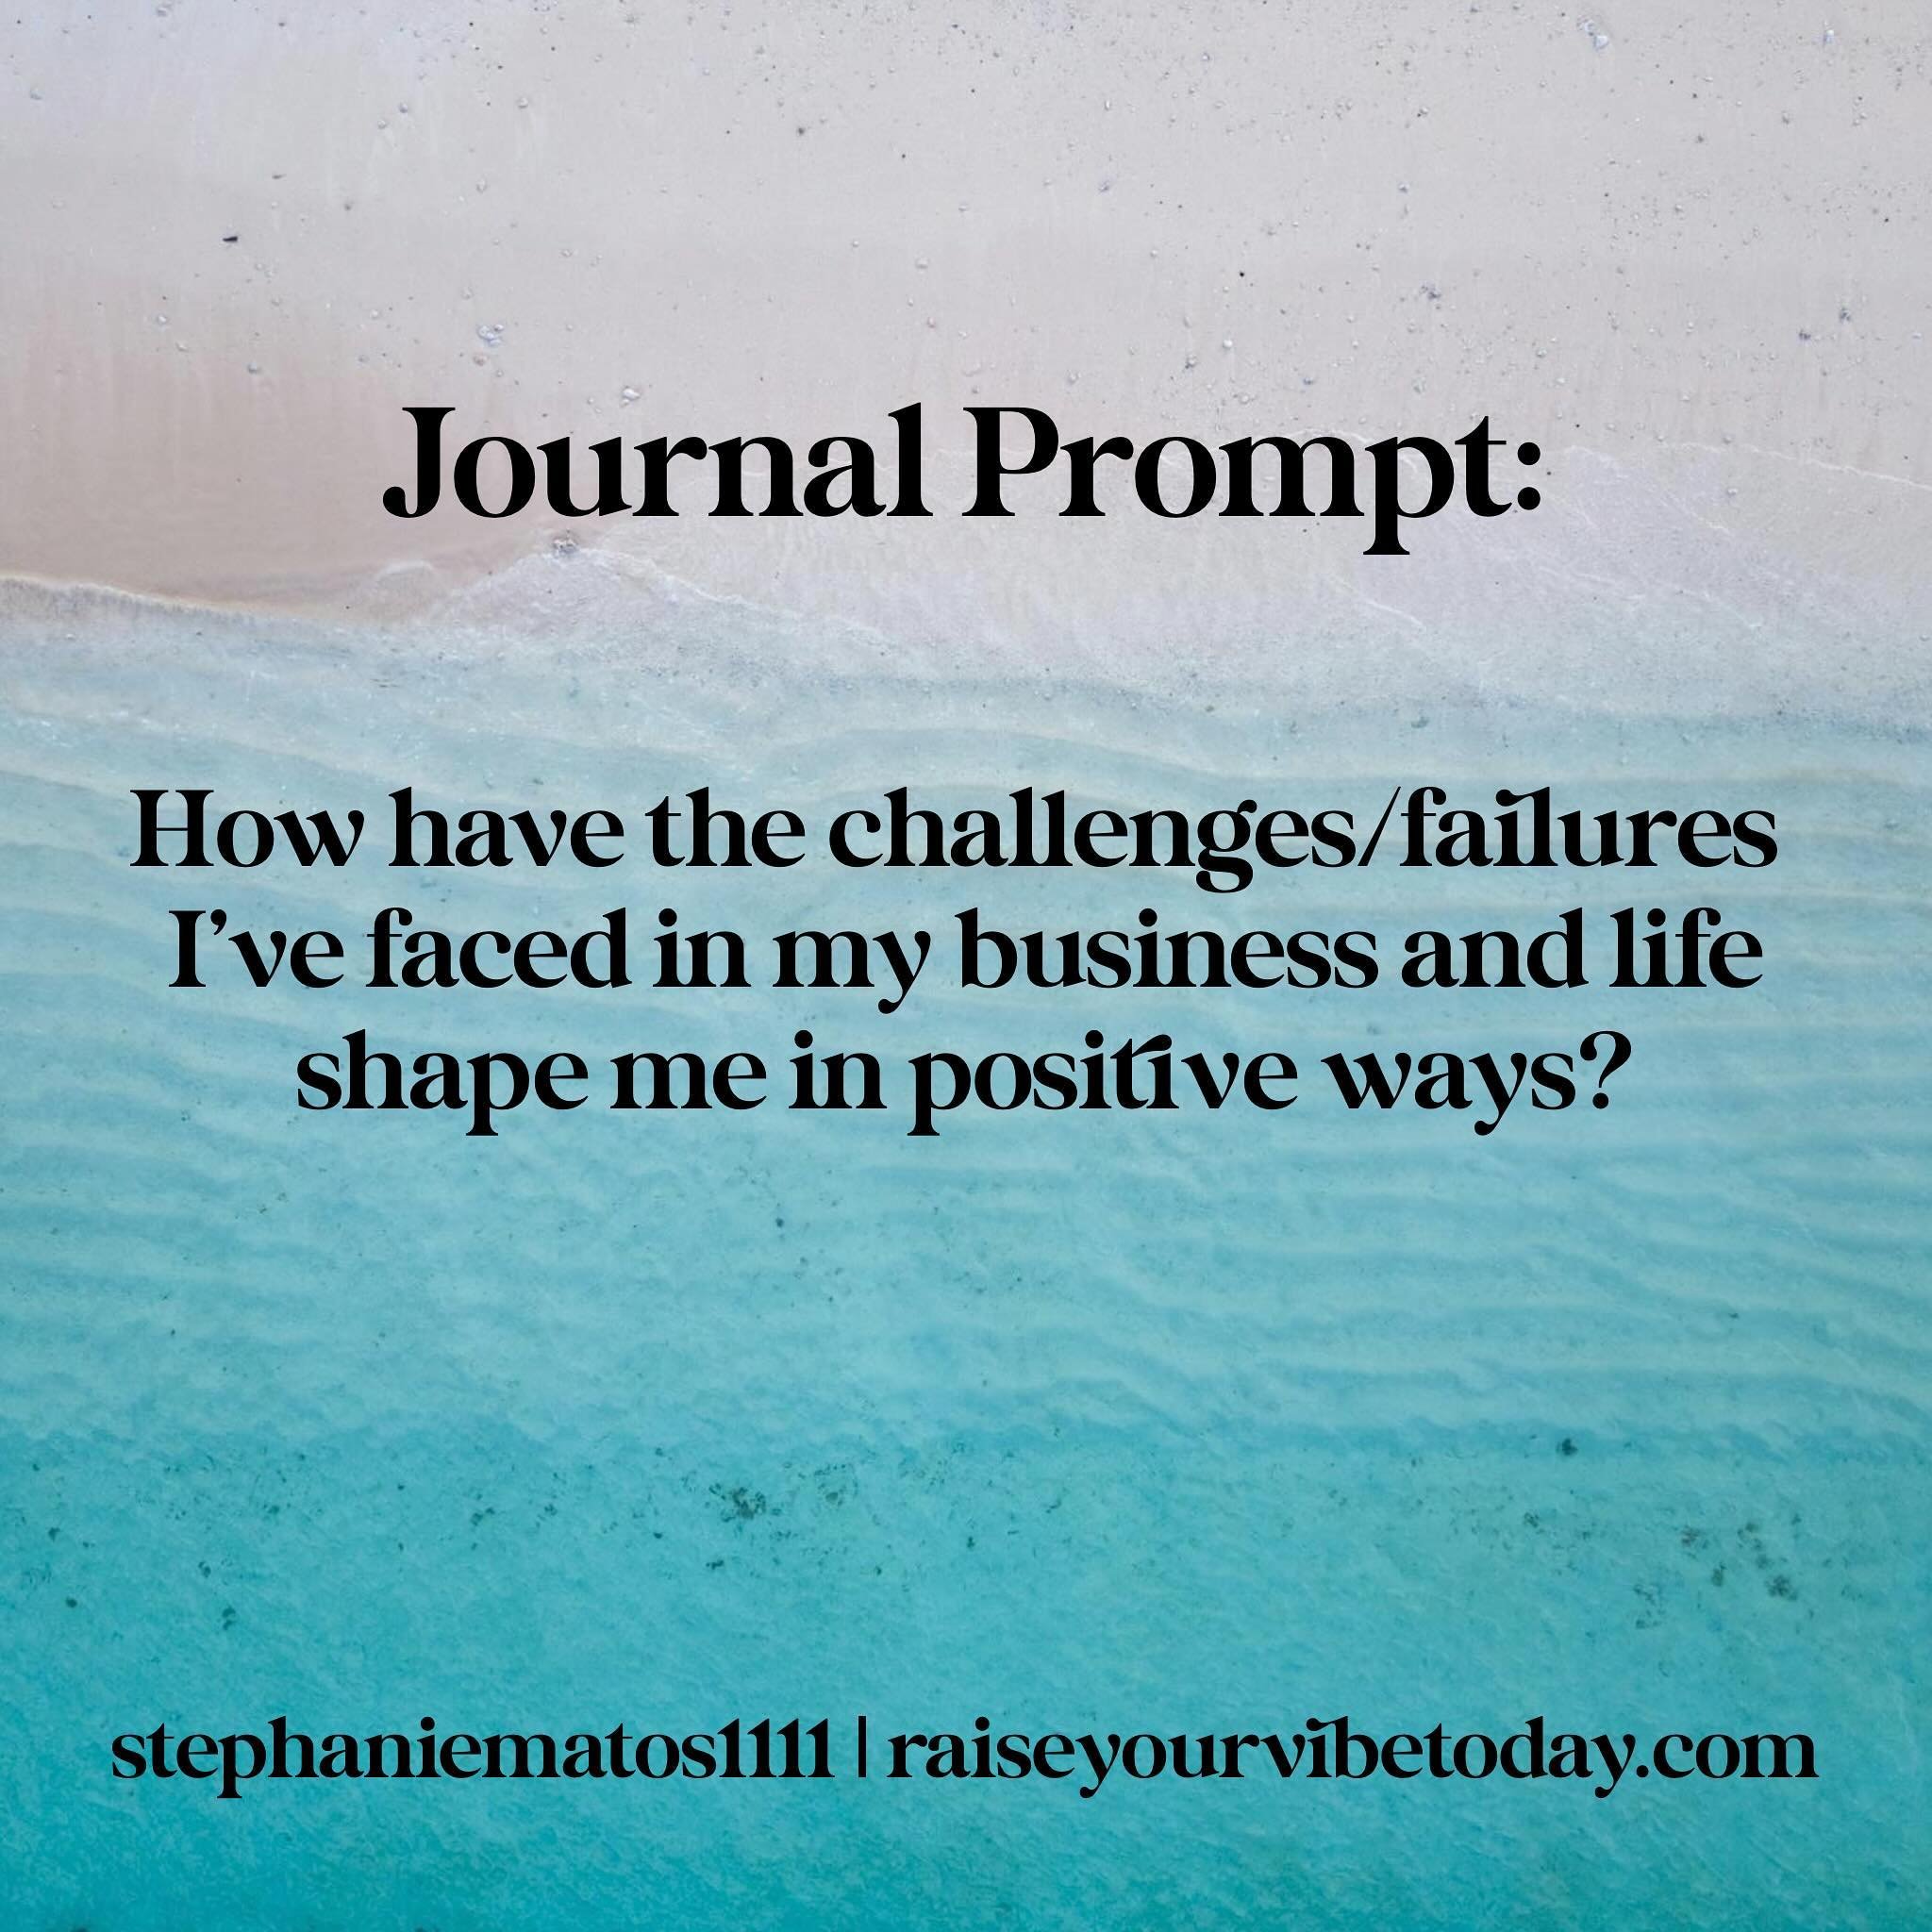 It is so common to fear making mistakes. We have been taught that failure is &ldquo;bad&rdquo; since we were kids taking tests in school. The truth is, failure is how we grow! This journal prompt can help you make friends with mistakes and failure. 
